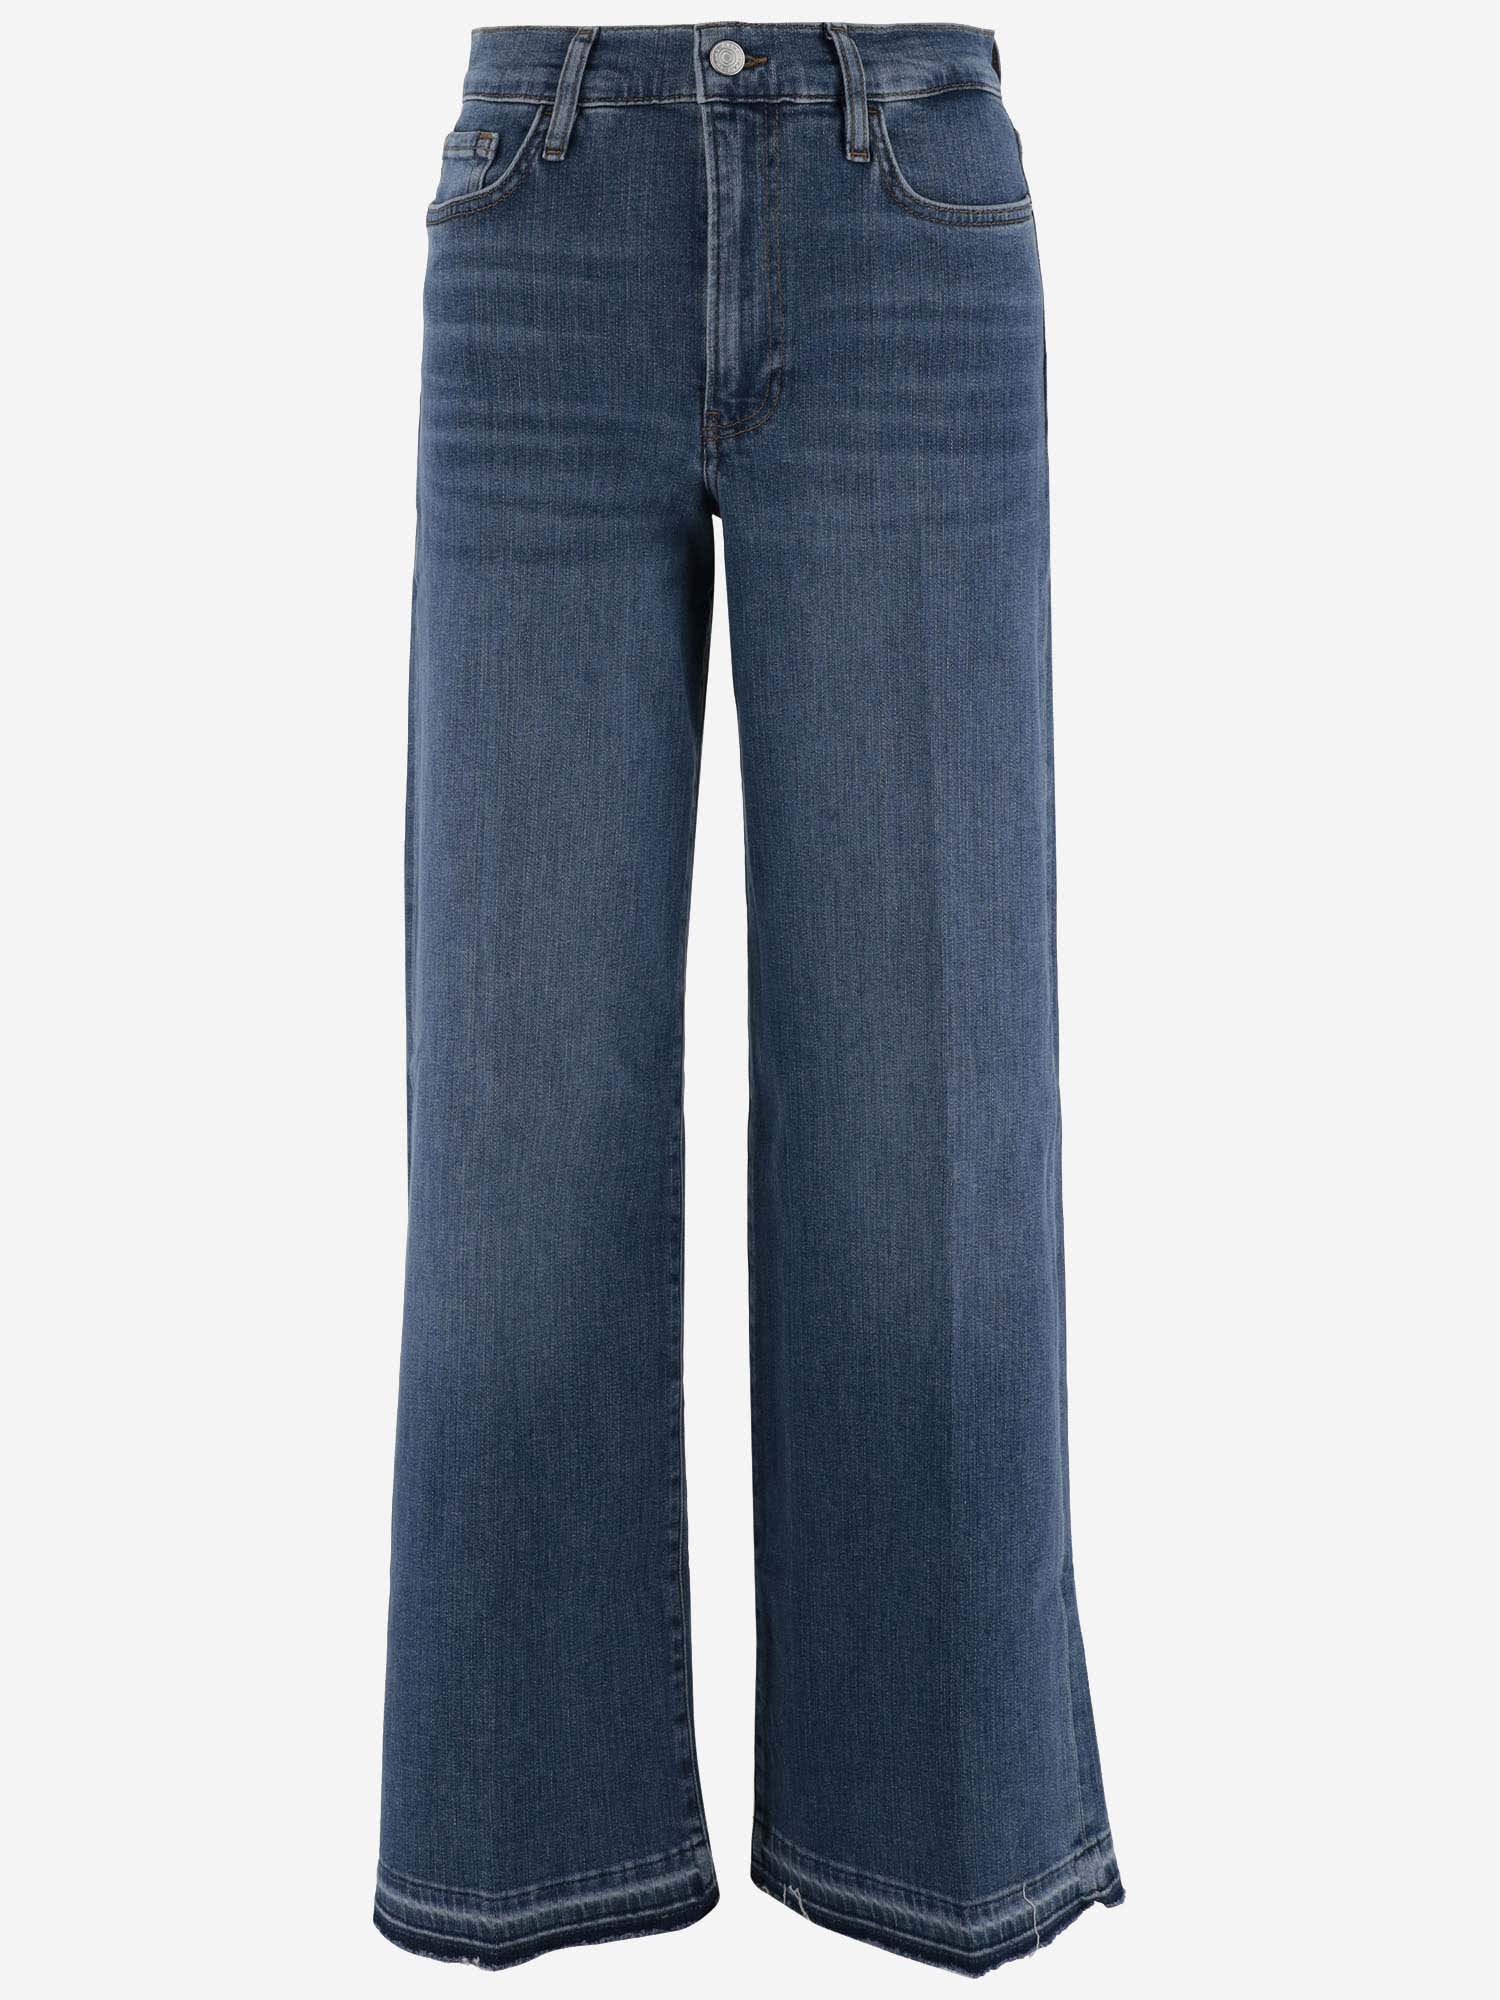 Modal And Cotton Blend Jeans